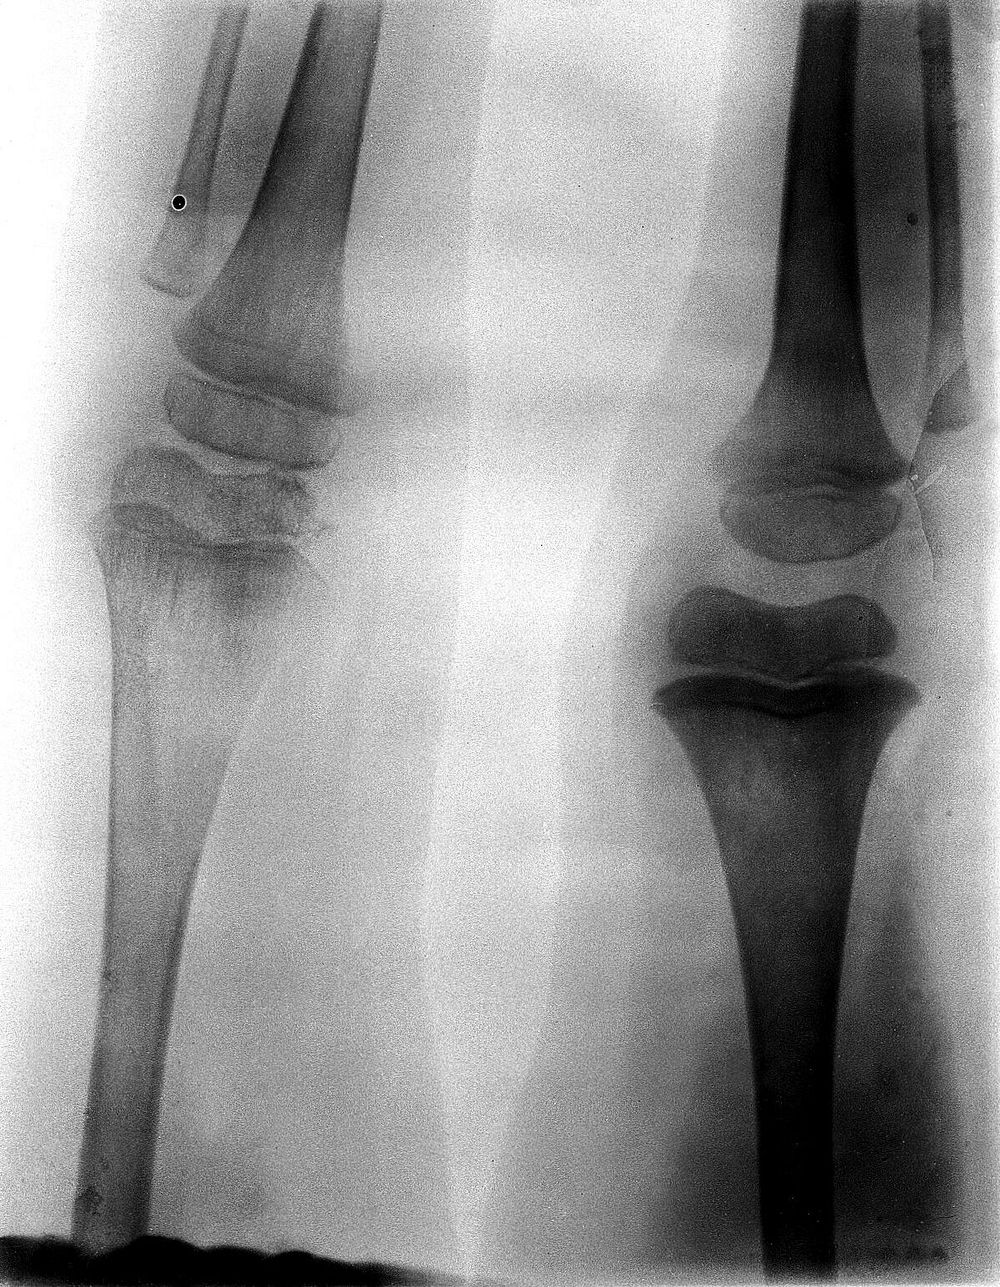 The left and right knee-joints of Frank Burgess, probably a soldier in the South African War, after excision of the left…